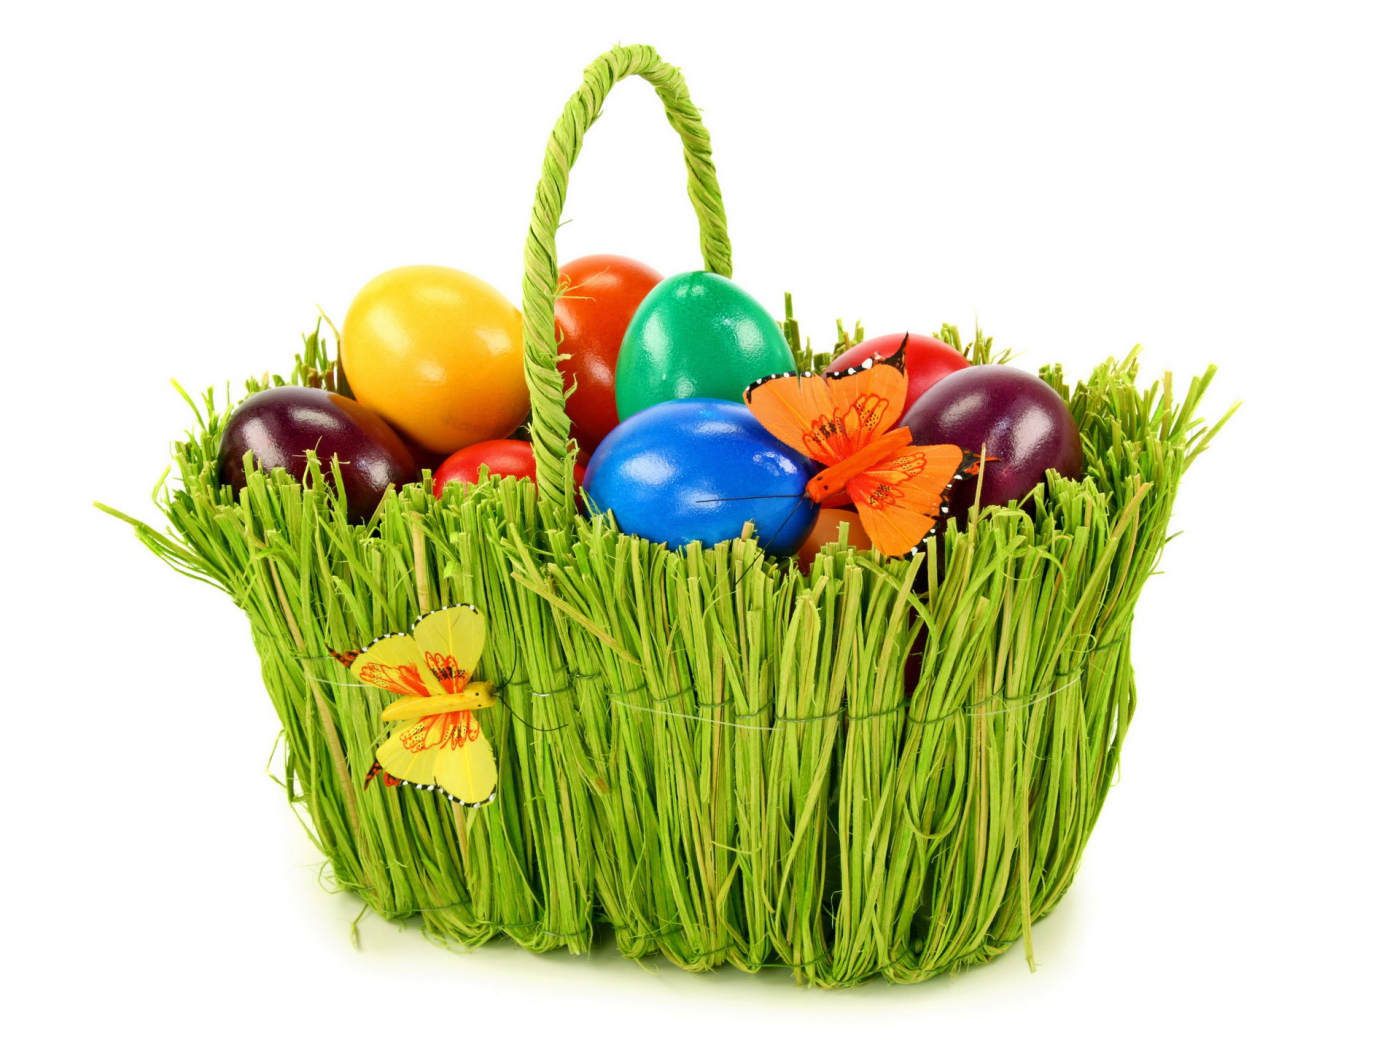 Green basket with eggs at Easter